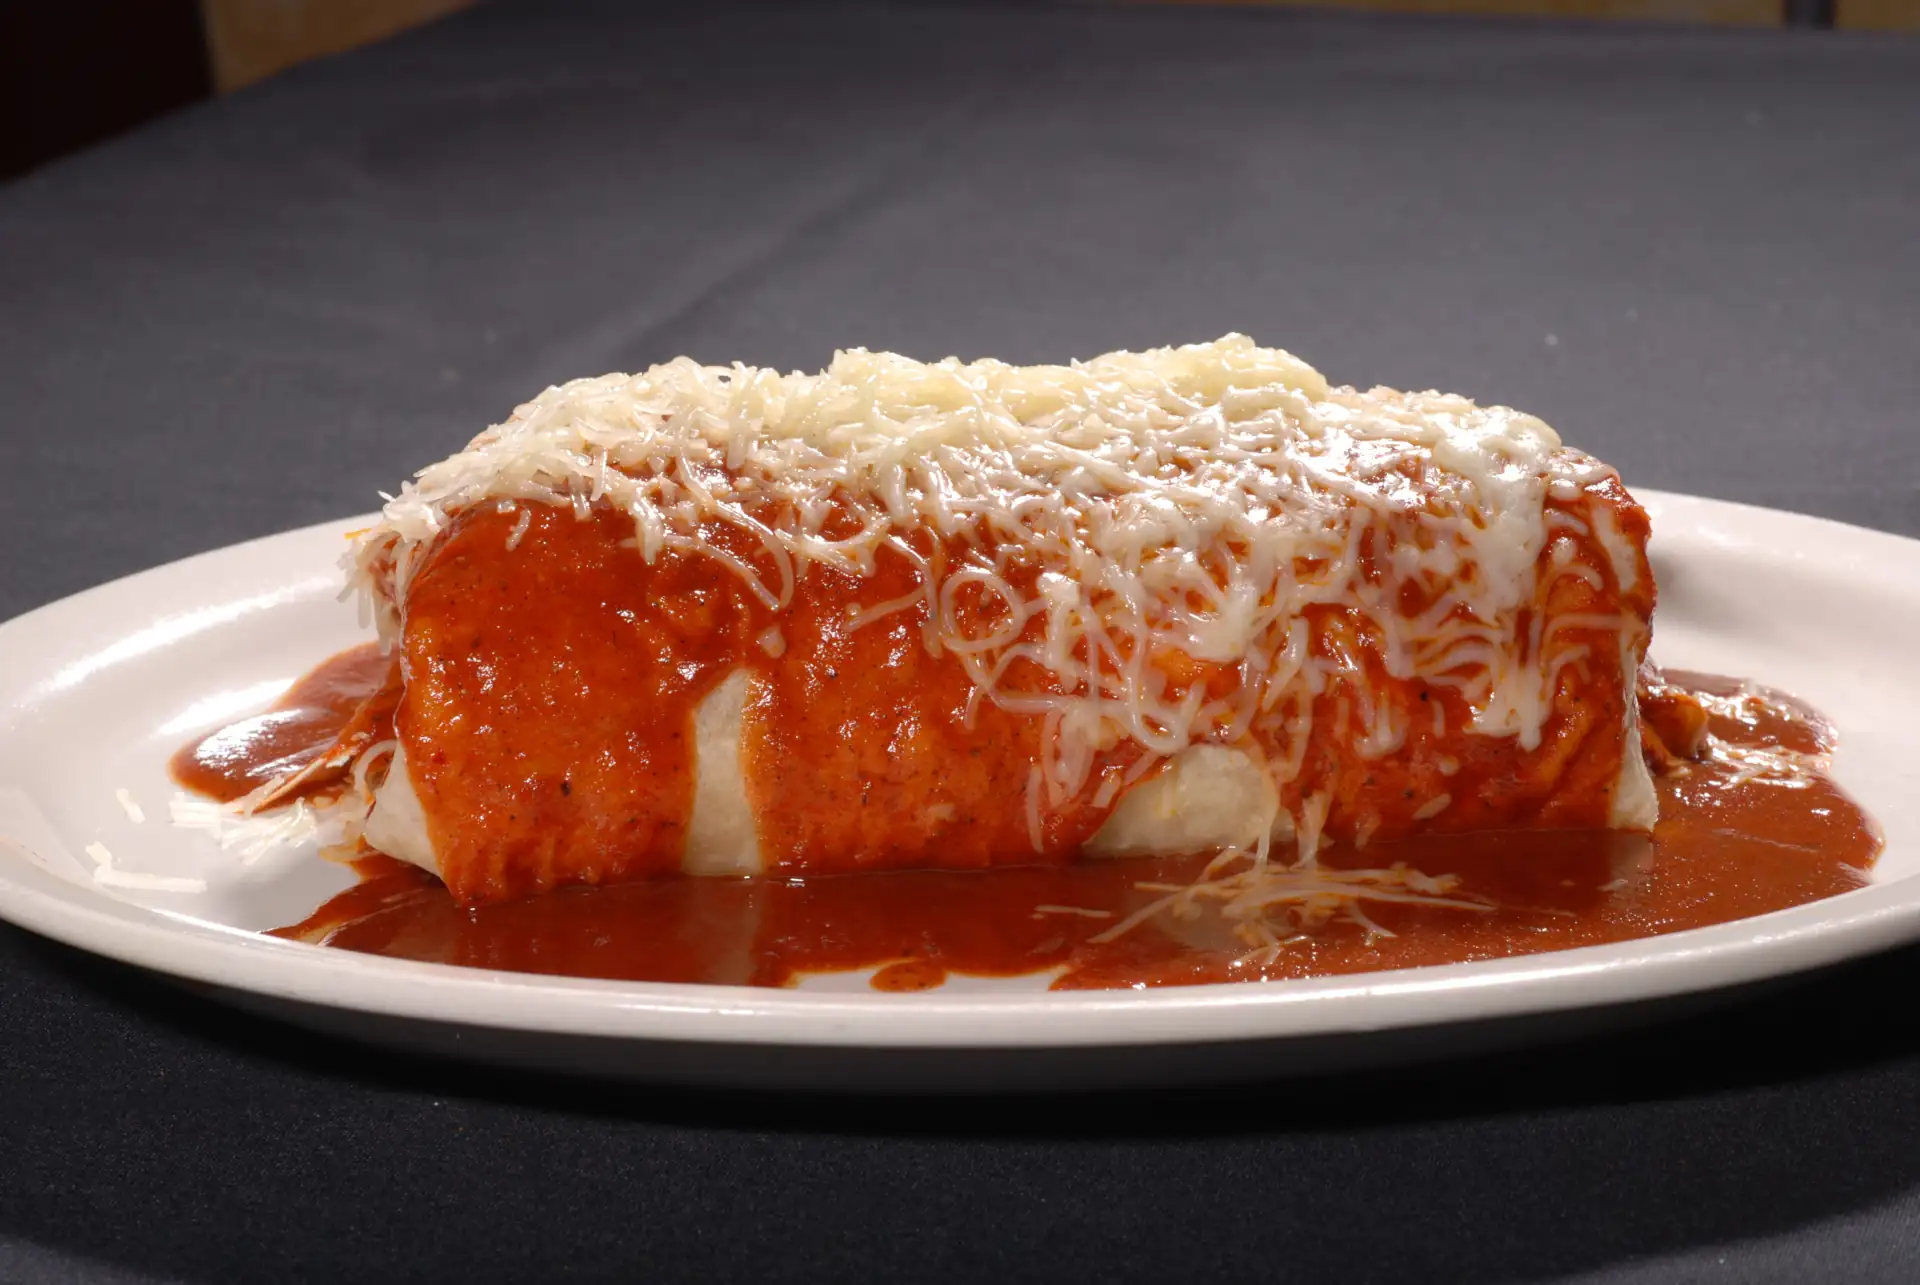 Wet Burrito with red sauce and cheese